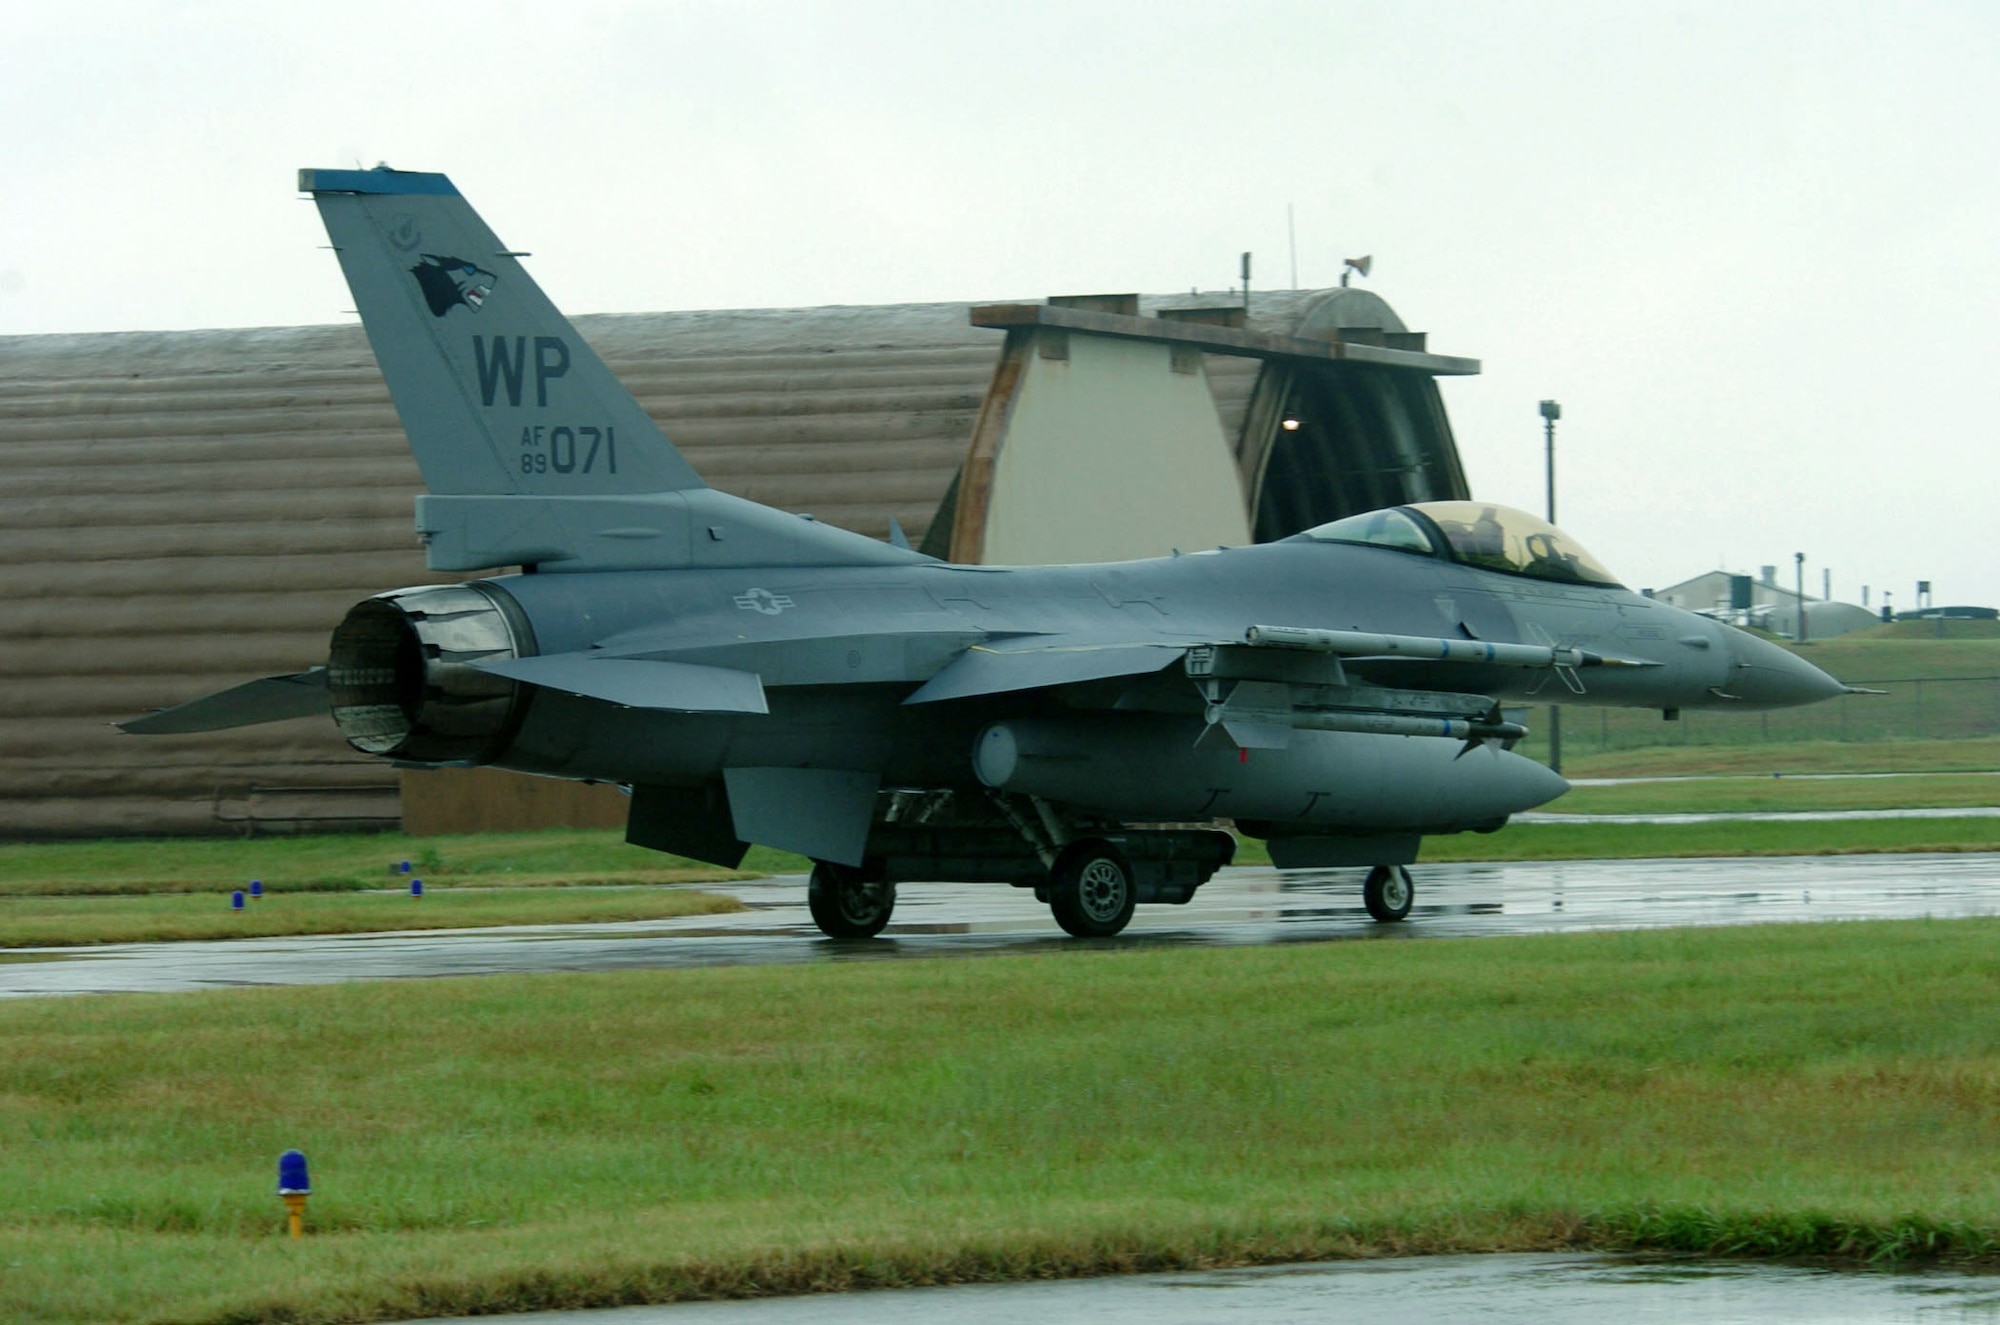 KUNSAN AIR BASE, South Korea -- A 35th Fighter Squadron F-16 Fighting Falcon taxis out for a mission here.  The aircraft is flown by the squadron's 1st Lt. John Wilson.  (U.S. Air Force photo by Master Sgt. Val Gempis)